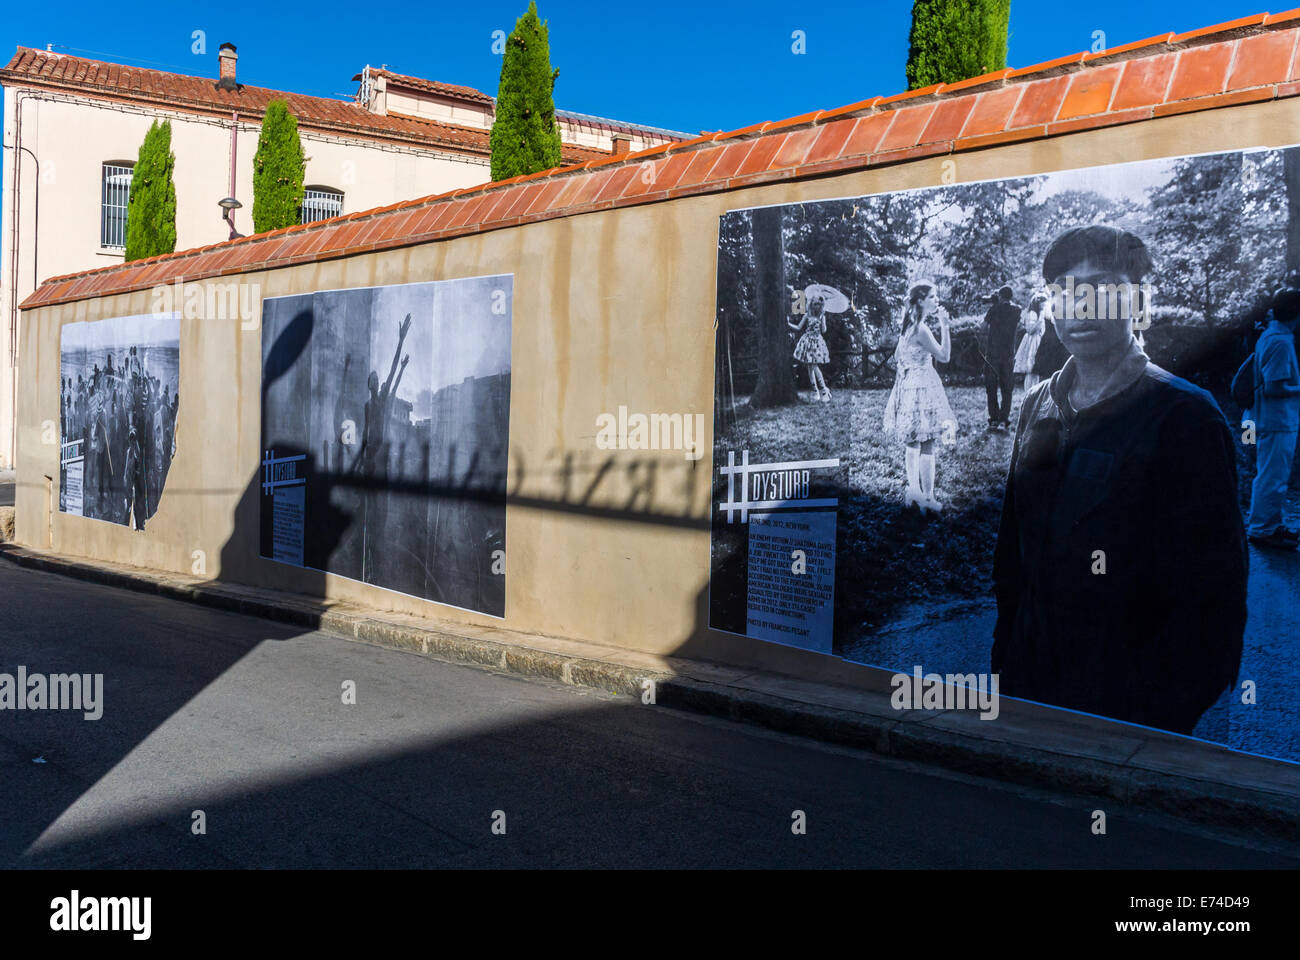 Perpignan, France, 'Visa Pour l'Image' Photojournalism Festival Photography Gallery Exhibition, Outdoor on City Walls, Street Posters Stock Photo